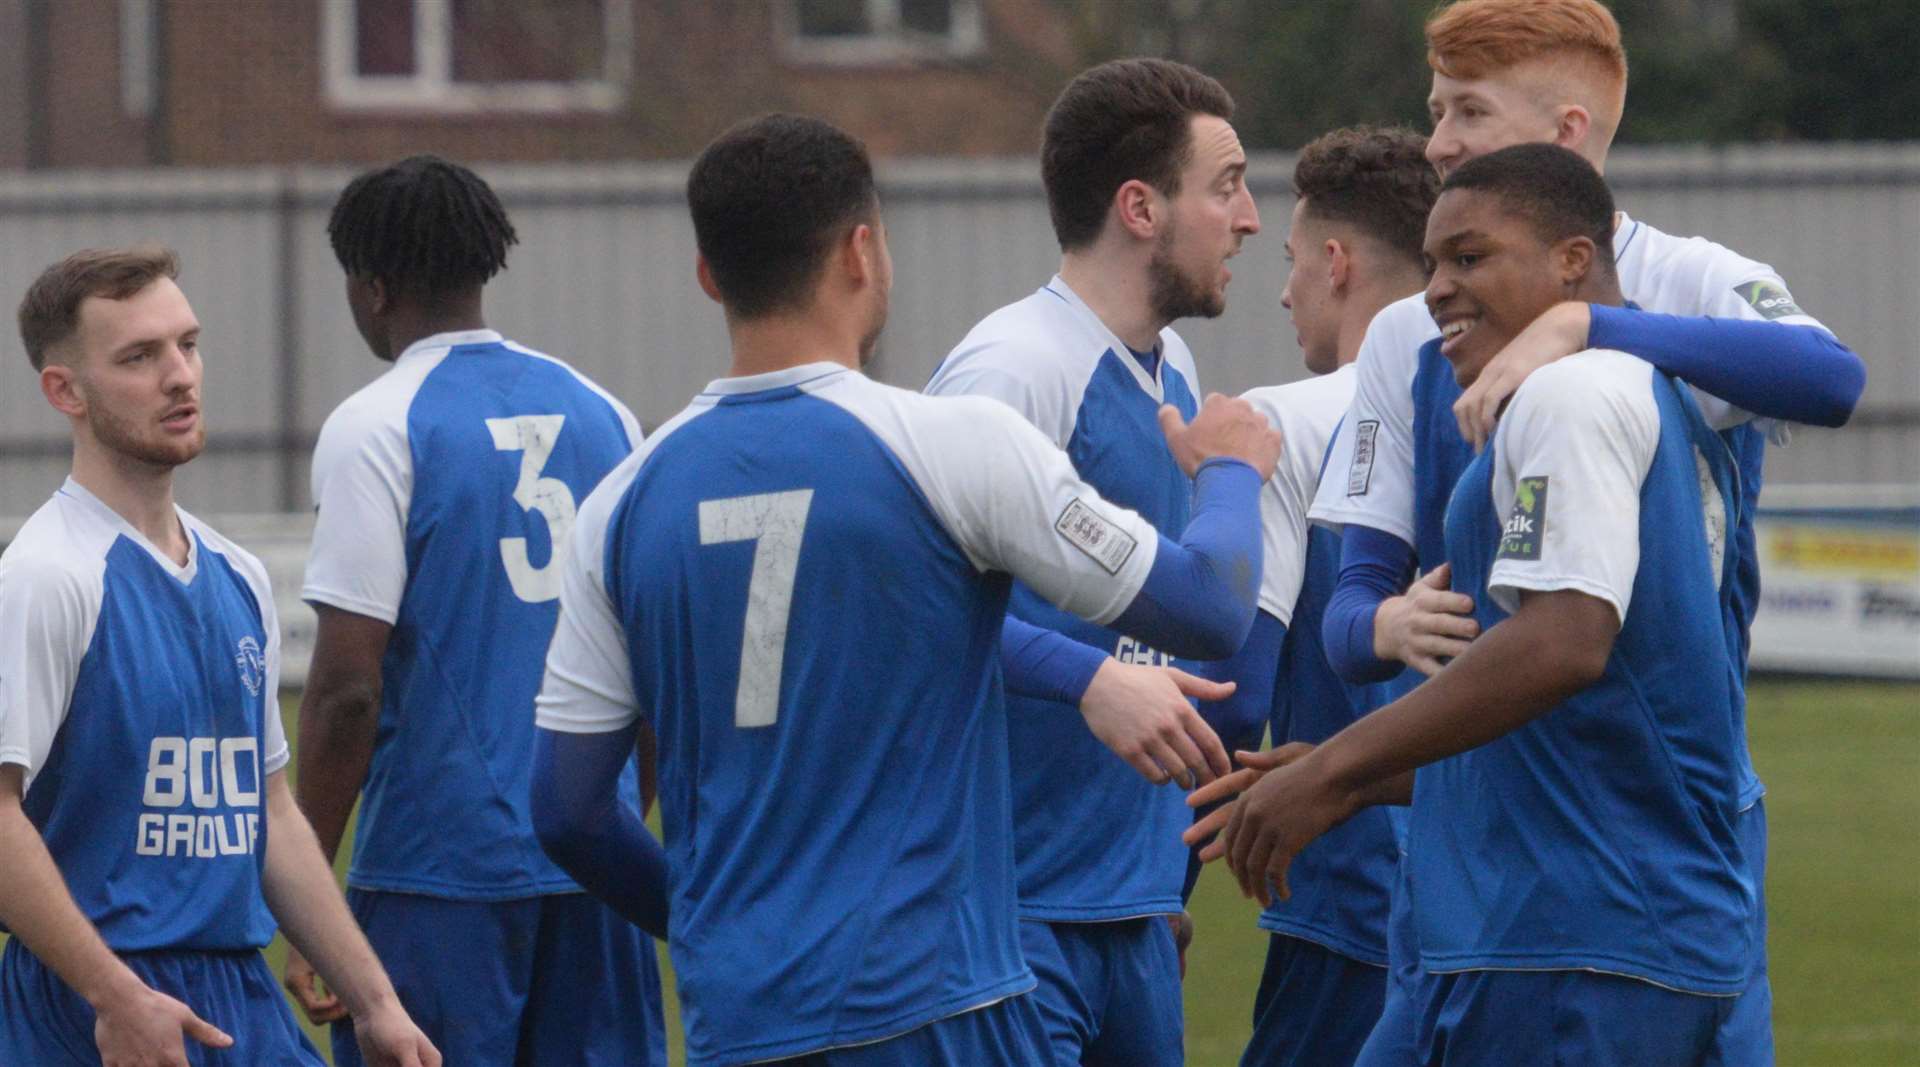 Herne Bay players congratulate Ronald Sobowale after he scored Herne Bay's second goal against Ashford on Saturday Picture: Chris Davey